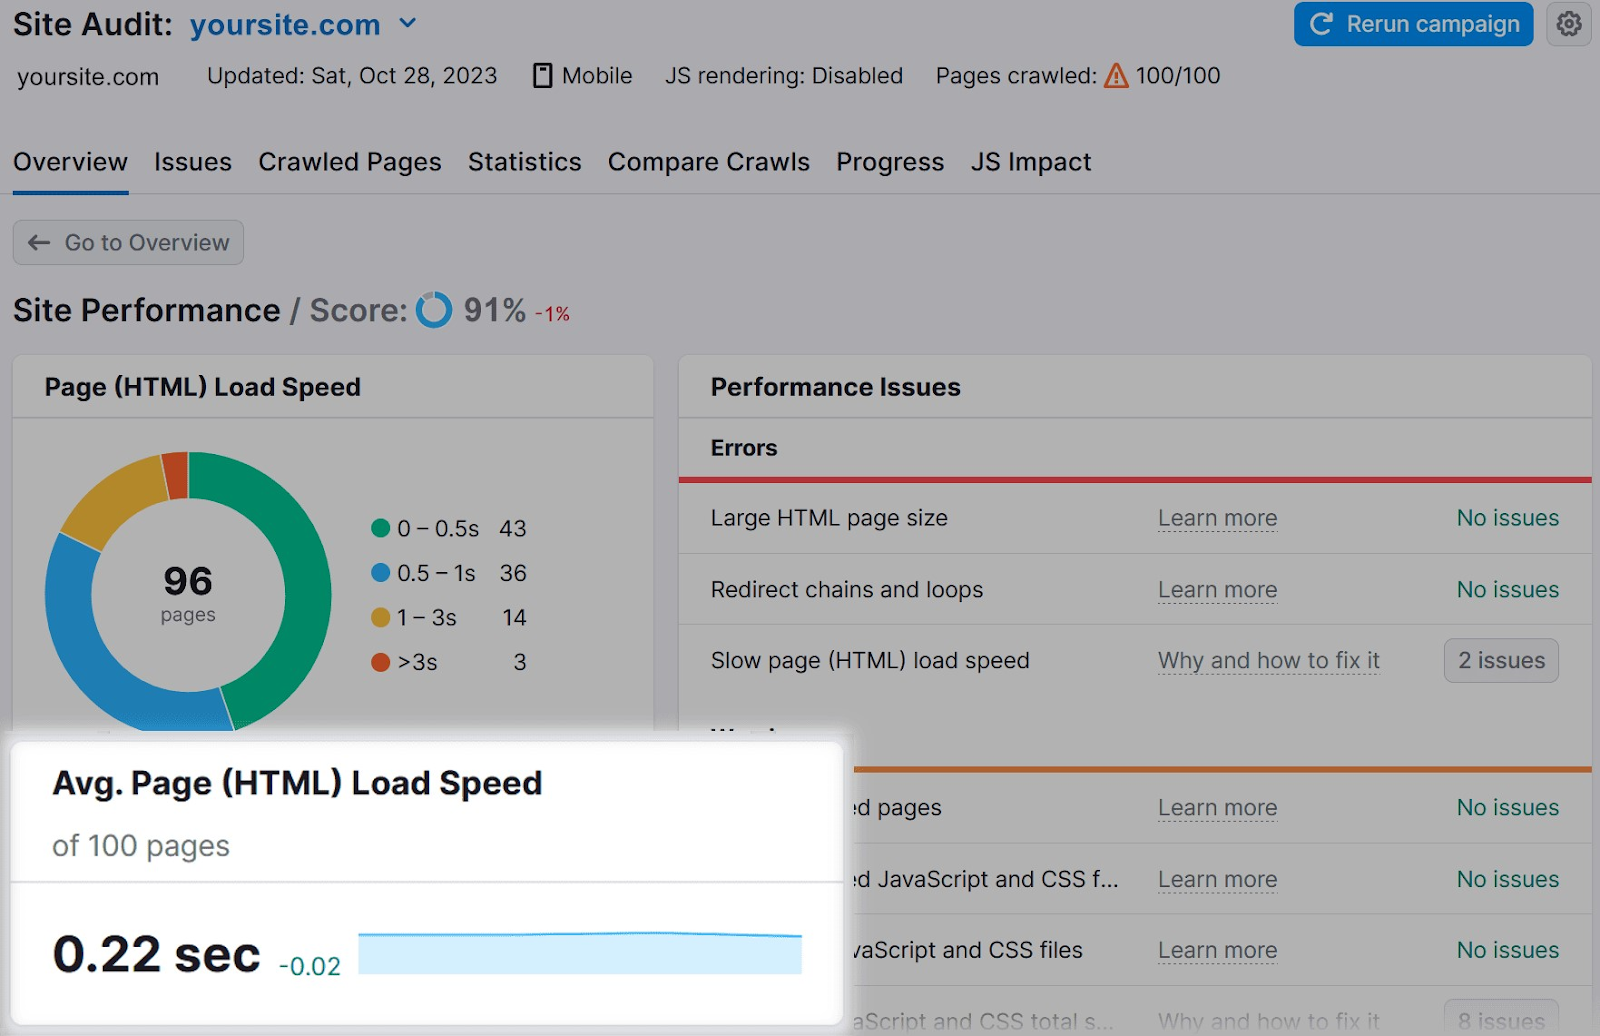 "Avg. Page (HTML) Load Speed" metric highlighted on the Site Audit overview dashboard